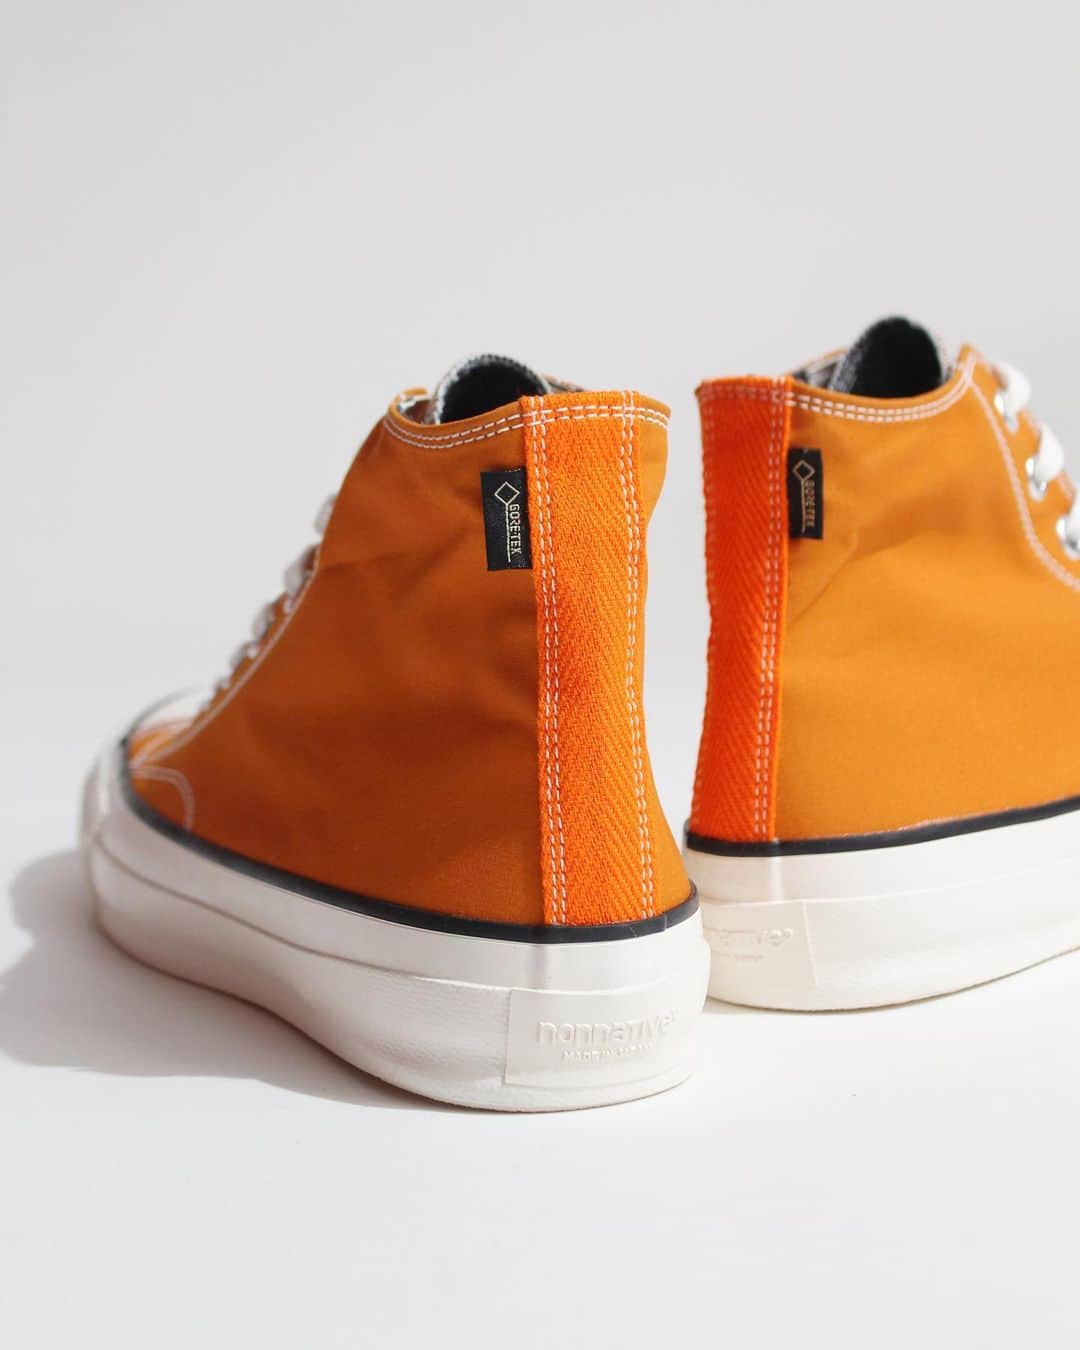 A+Sさんのインスタグラム写真 - (A+SInstagram)「in stock now  ■nonnative DWELLER TRAINER HI COTTON BC GORE-TEX® 2L COLOR : ORANGE SIZE : 1/26.5㎝, 2/27.0㎝, 3/27.5㎝, 4/28.5㎝ PRICE : ¥35,800 (+TAX)  木型からアッパー、ソールの仕様まで細部にわたりゼロからデザインされ、「スピングルカンパニー」にて制作されたオリジナルスニーカー。高密度織りときめの細かな起毛感が特徴のコットンバフクロスの表地を使用し、ライニングには防水・透湿性に優れたGORE-TEX®を採用。 nonnativeならではの機能性に加え、熟練した職人により丁寧に作られる「バルカナイズ(加硫)製法」を用いることで、耐久性と美しいシルエット、そしてしなやかな履き心地を実現しました。   Original sneakers produced by "Spingle Company", designed from scratch in every detail from the wooden pattern to the specifications of the upper and sole. The outer material of cotton buff cloth, which is characterized by high-density weaving and finely brushed texture, is used, and the lining is GORE-TEX®, which is highly waterproof and breathable. In addition to the functionality unique to nonnative, by using the "vulcanized manufacturing method" carefully made by skilled craftsmen, durability, a beautiful silhouette, and supple comfort have been achieved.  @nonnative  #a_and_s #nonnative #nonnativeDWELLERTRAINERHI  #GORETEX」11月28日 16時29分 - a_and_s_official